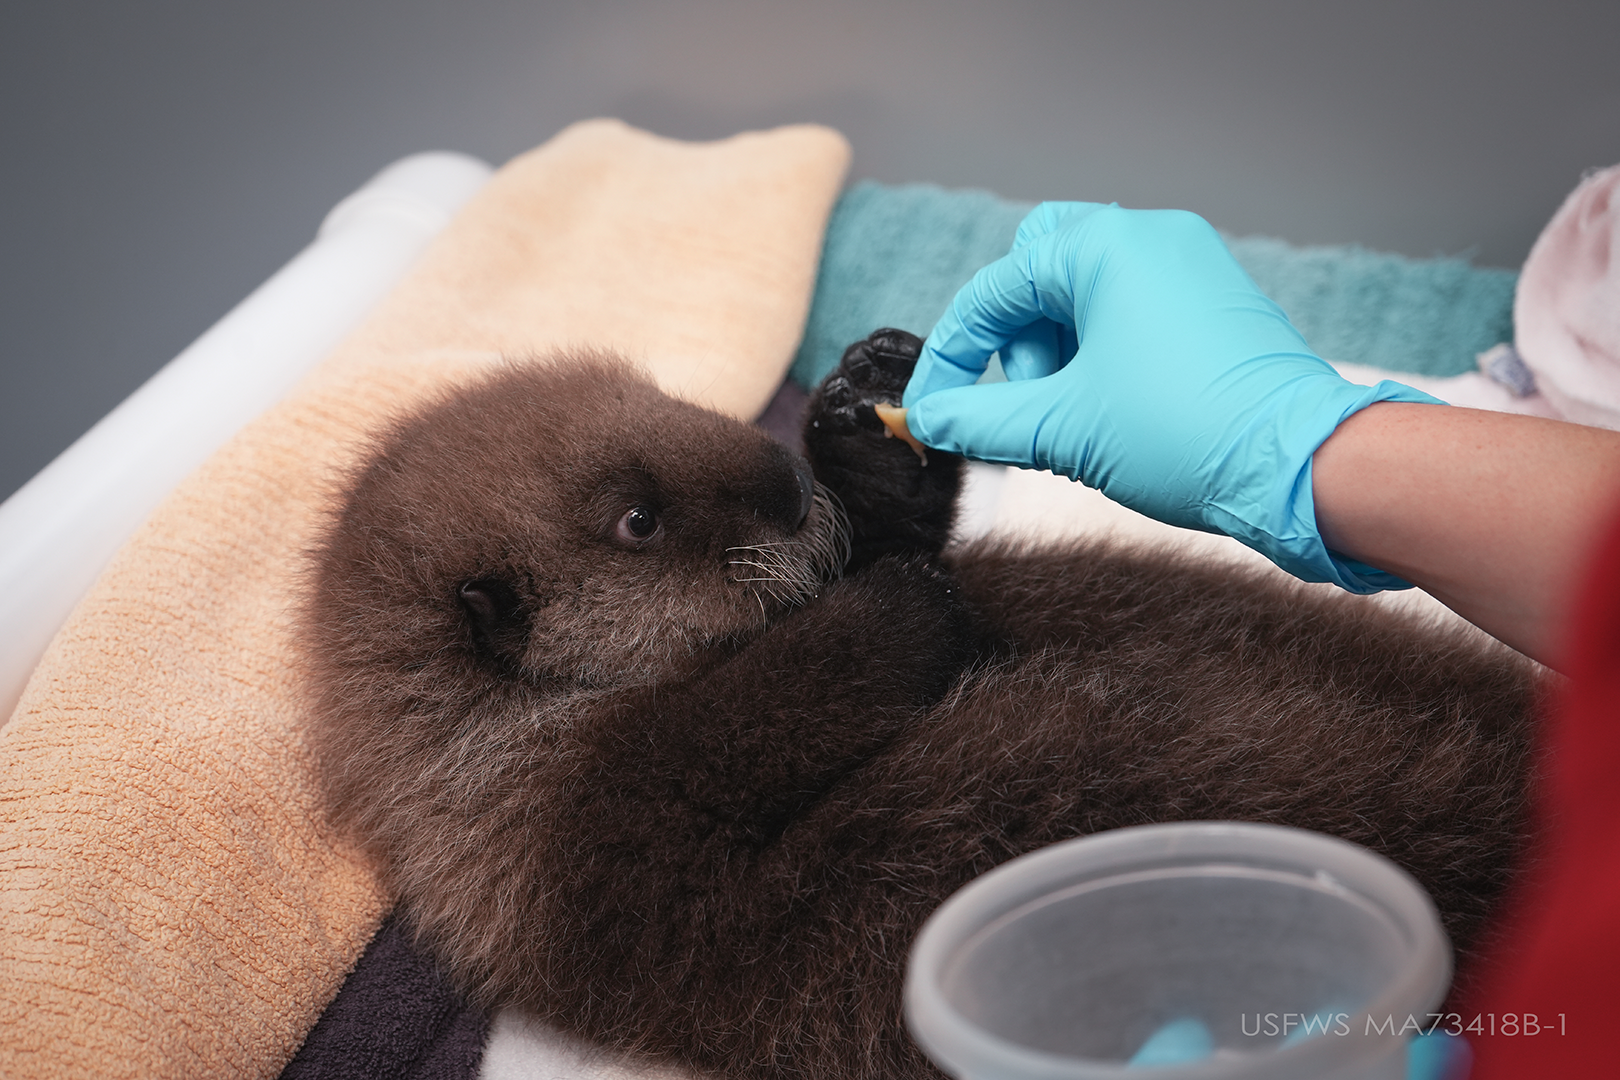 Sea otter pup Nuka being fed by hand.